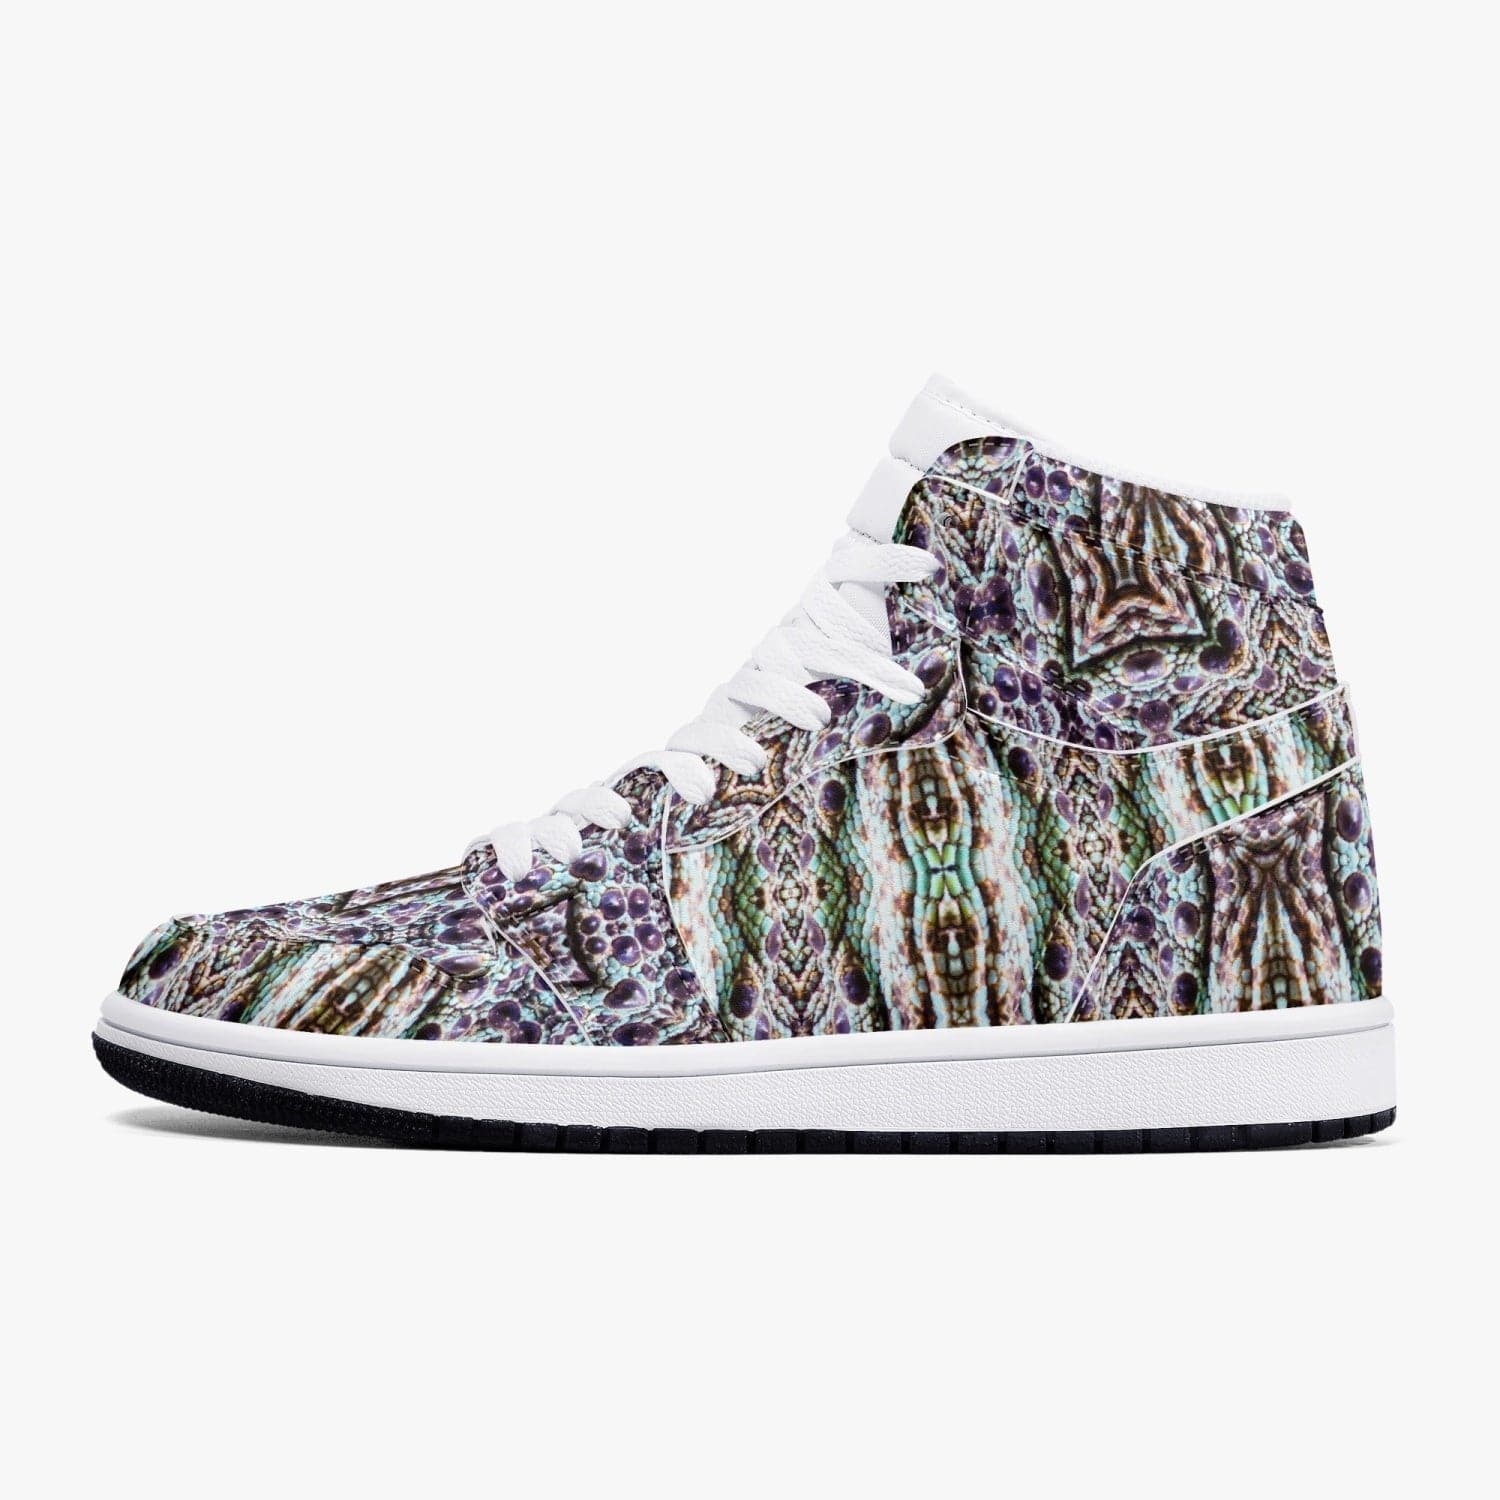 White purple and blue Lizard  New Black High-Top Leather Sneakers, by Sensus Studio Design